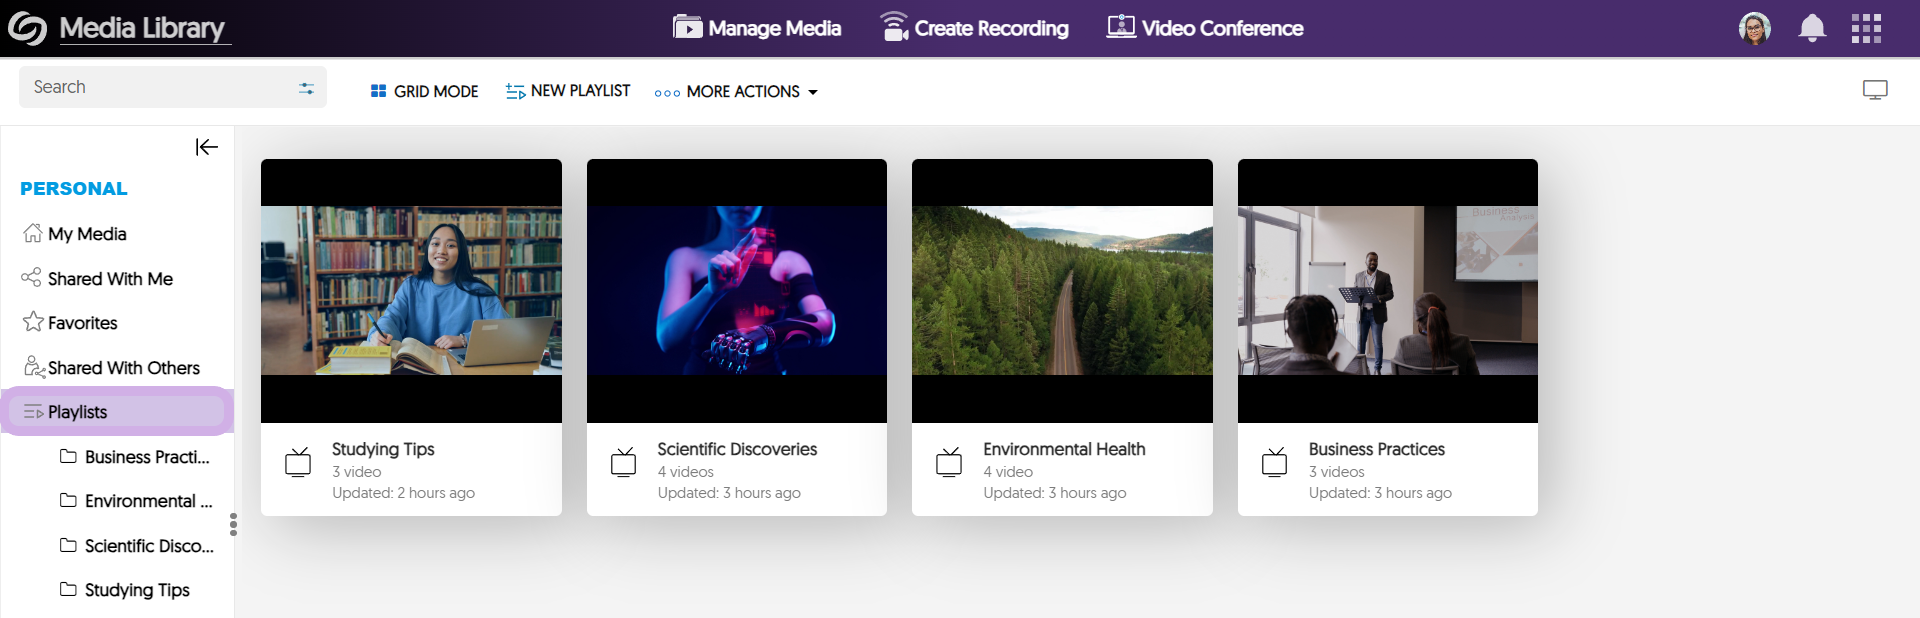 The Video Platform features the Playlist feature with various playlist folders created under the list of Personal channels.